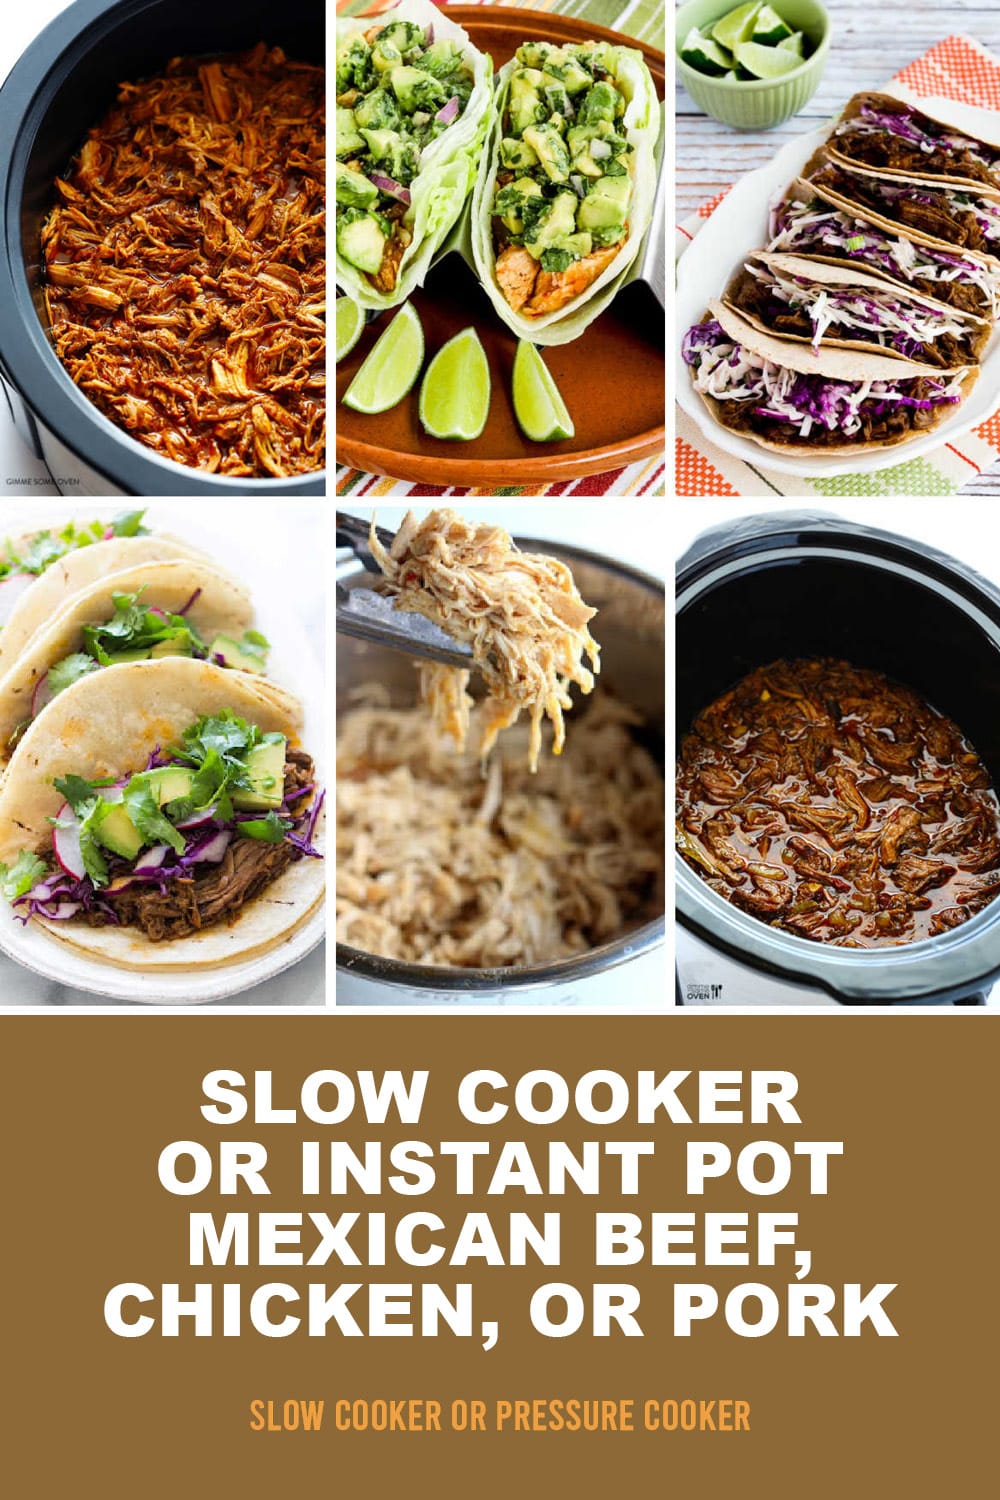 Pinterest image of Slow Cooker or Instant Pot Mexican Beef, Chicken, or Pork